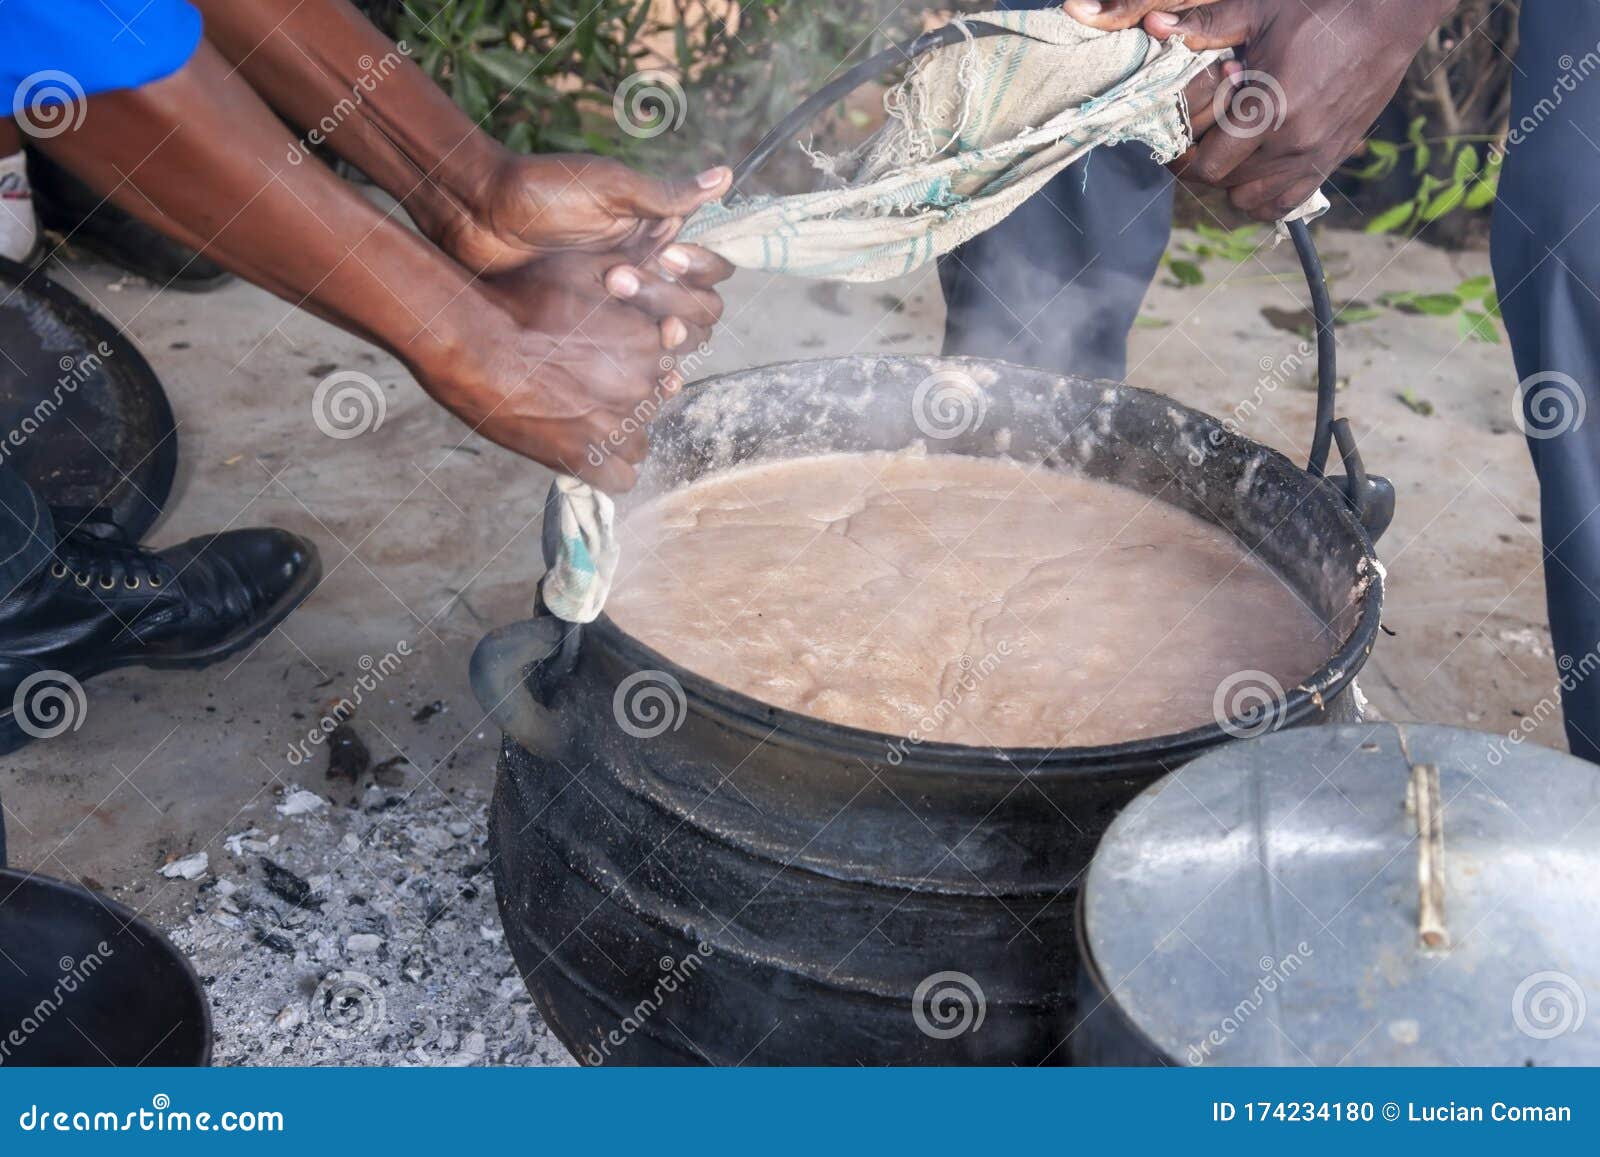 Traditional Cuisine Big Black Pot Cooking Food, Natural Fire With Wood  Heating Stock Photo, Picture and Royalty Free Image. Image 91055974.